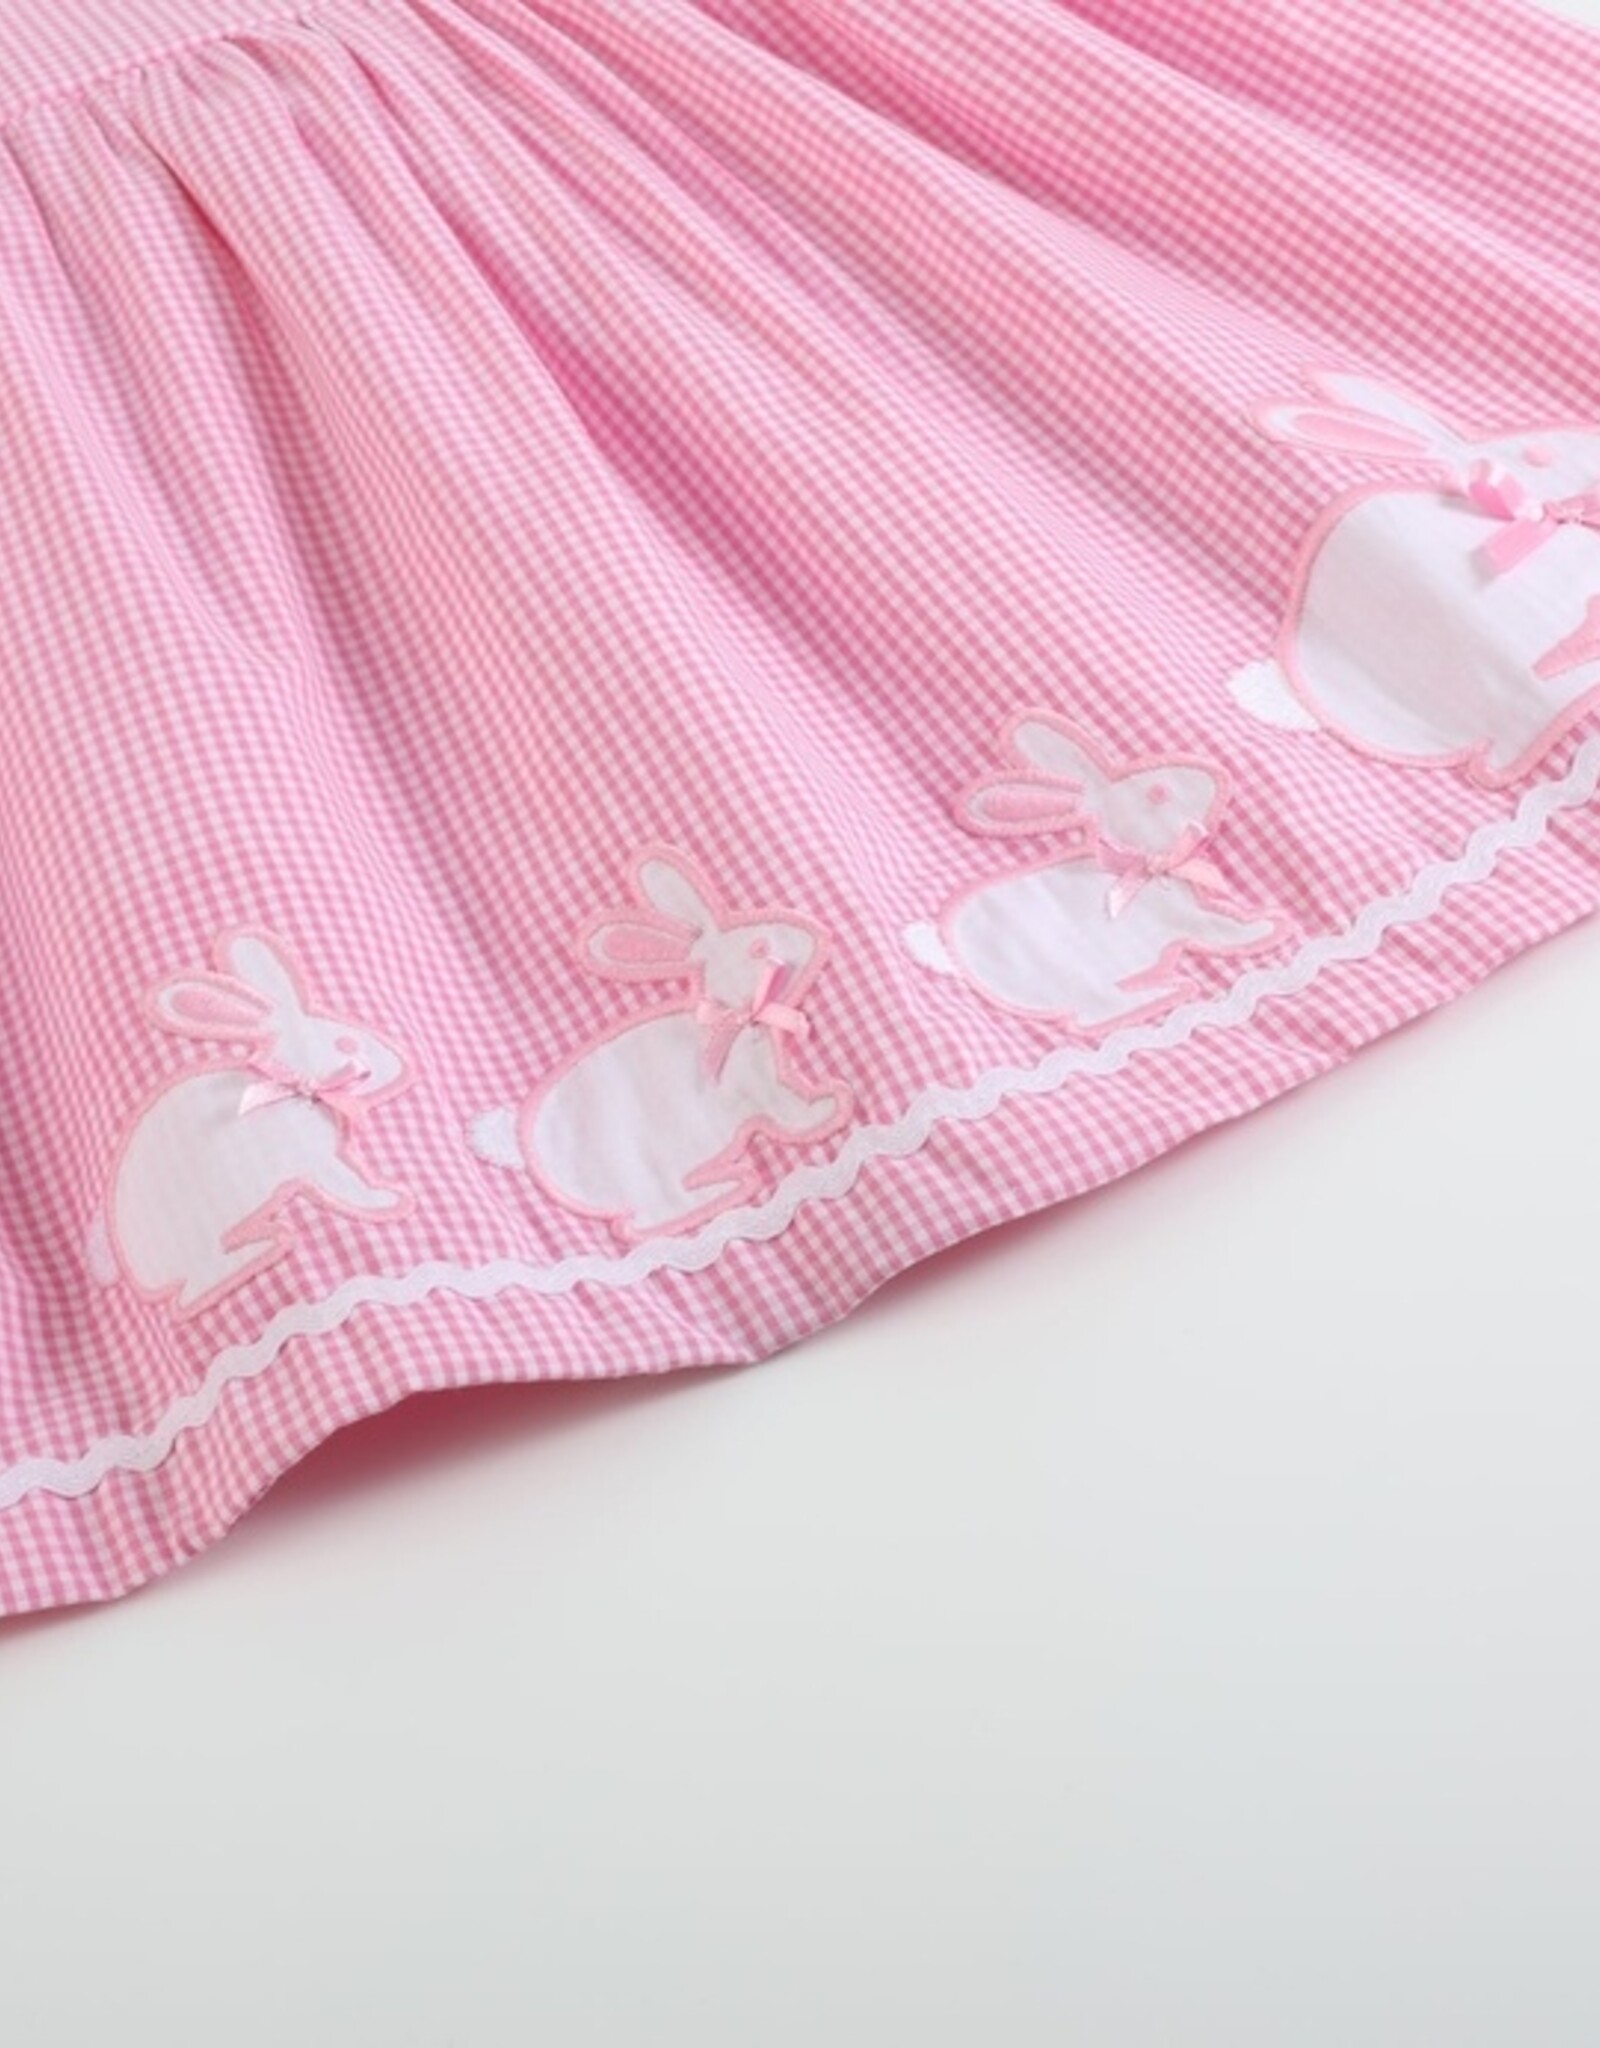 Pink Gingham Bunny Family Button Dress